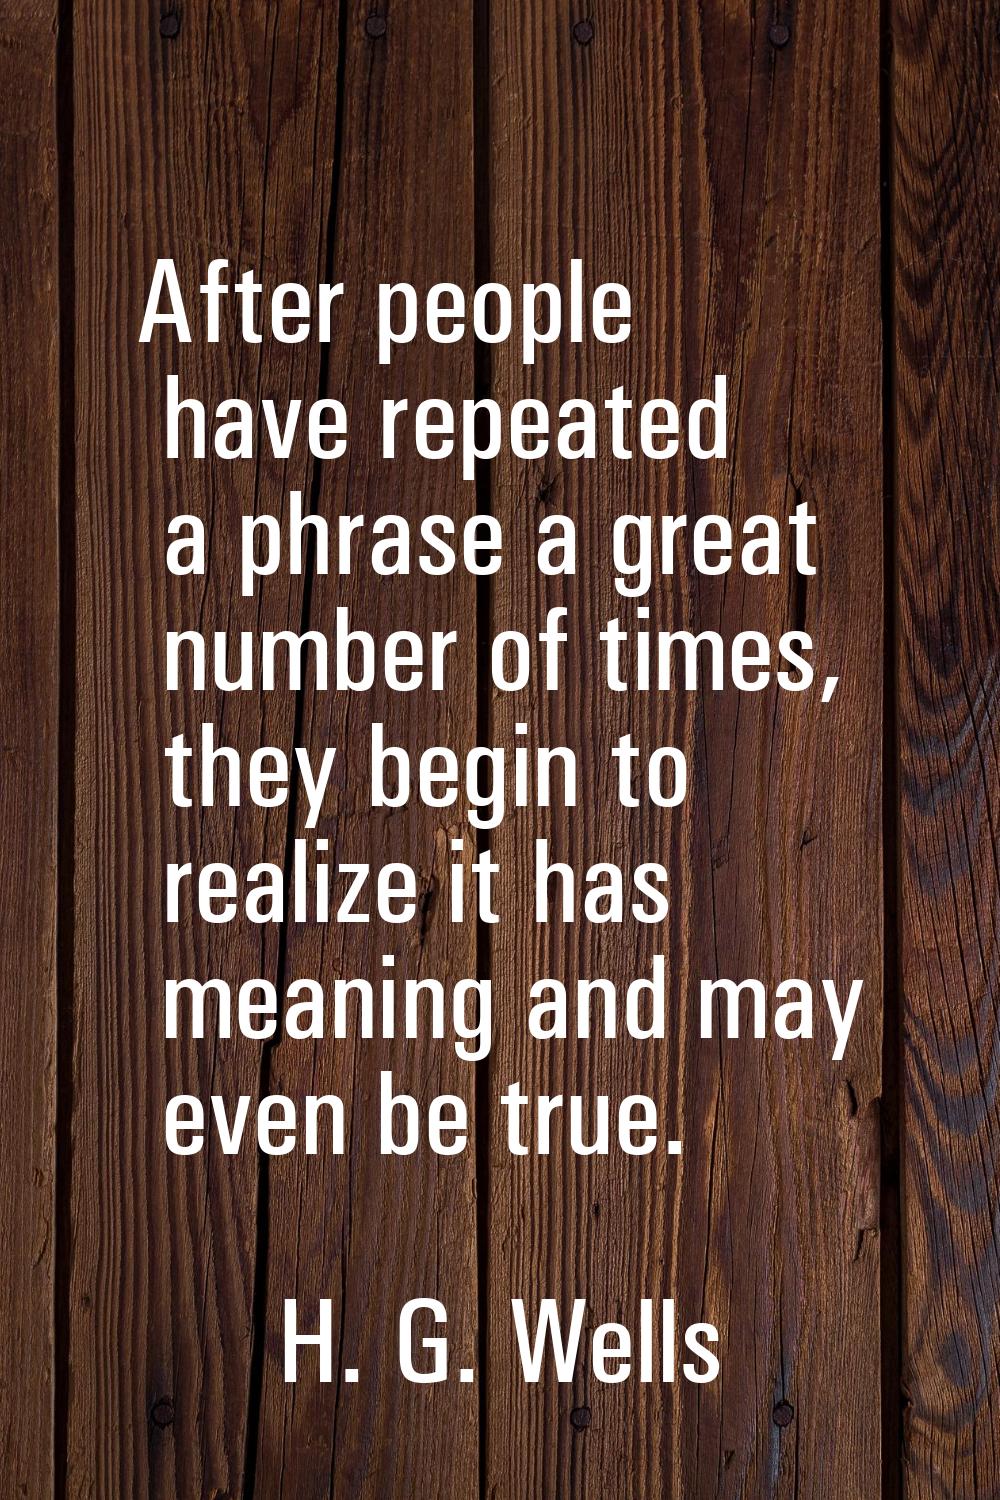 After people have repeated a phrase a great number of times, they begin to realize it has meaning a